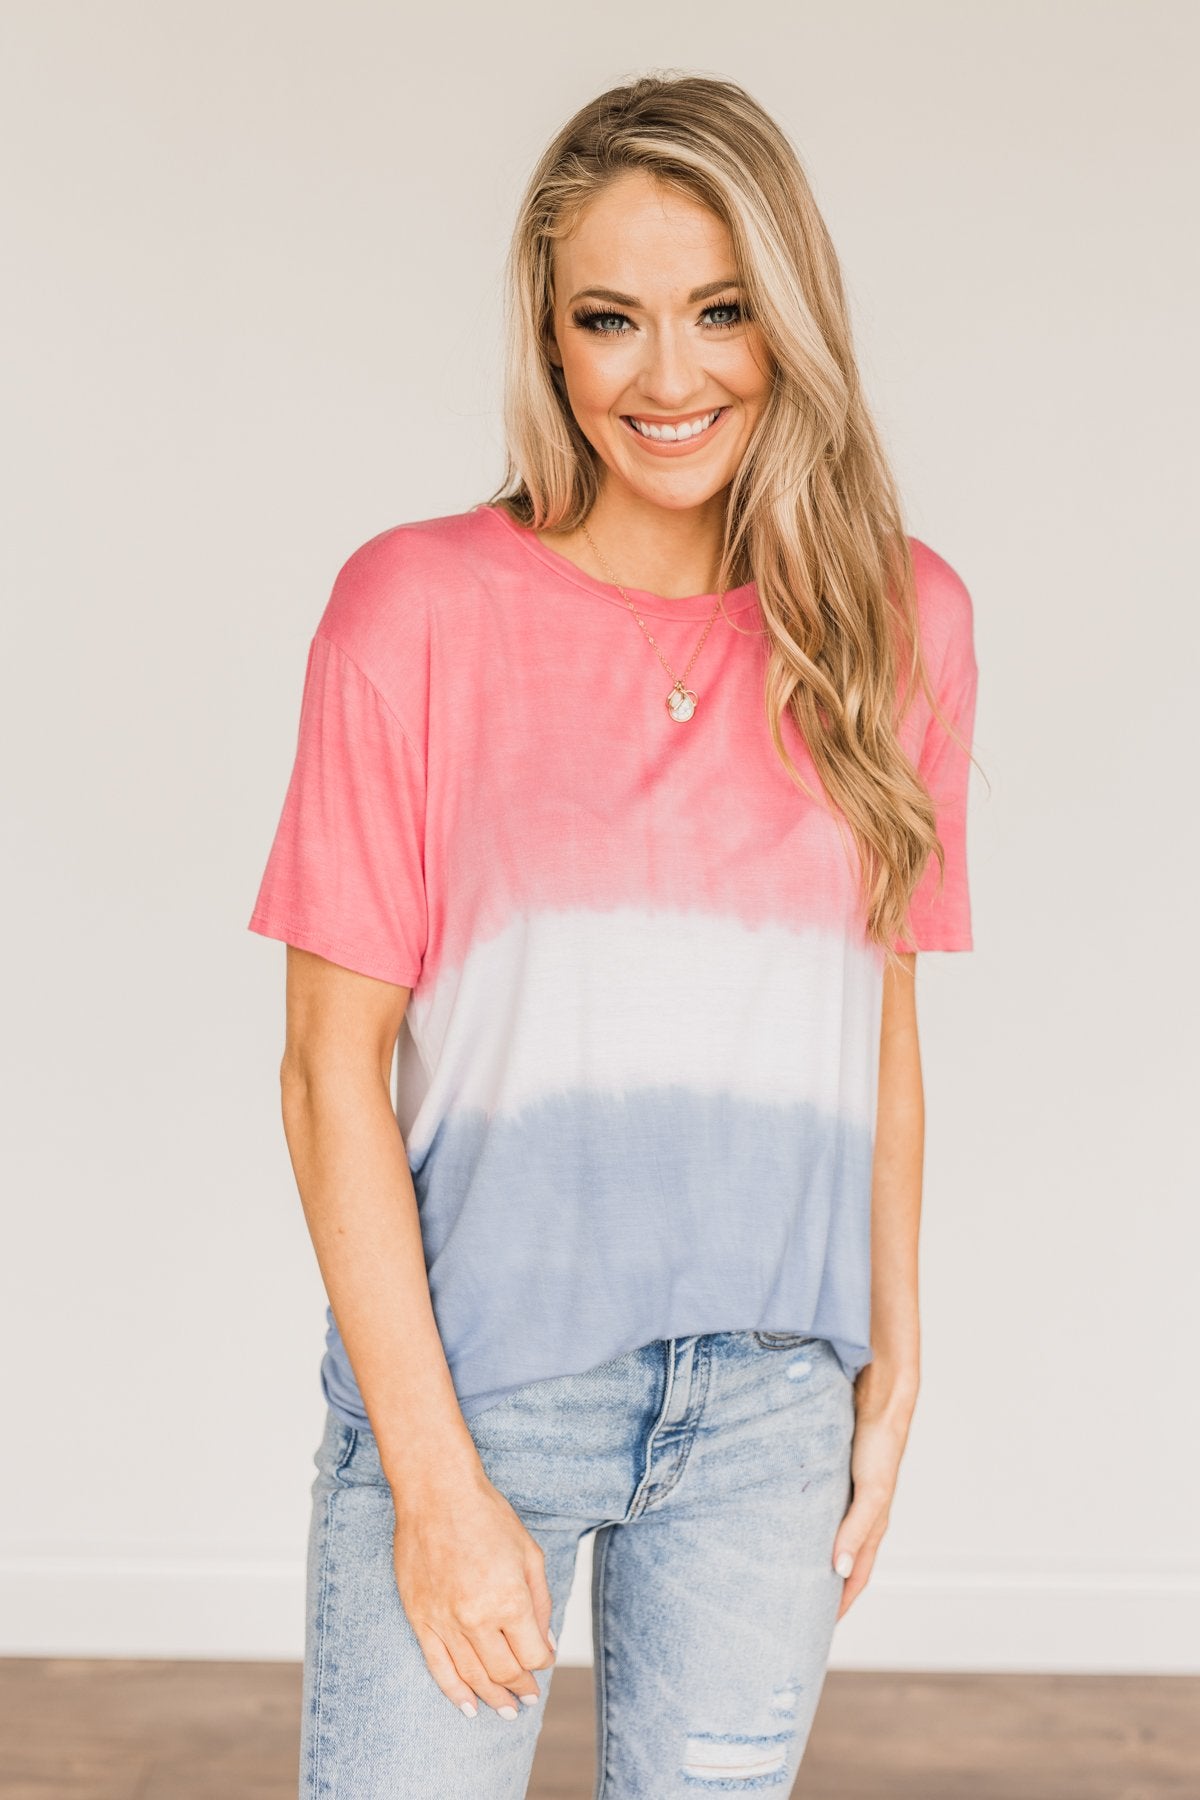 Honored & Inspired Tie-Dye Top- Red, Ivory & Blue